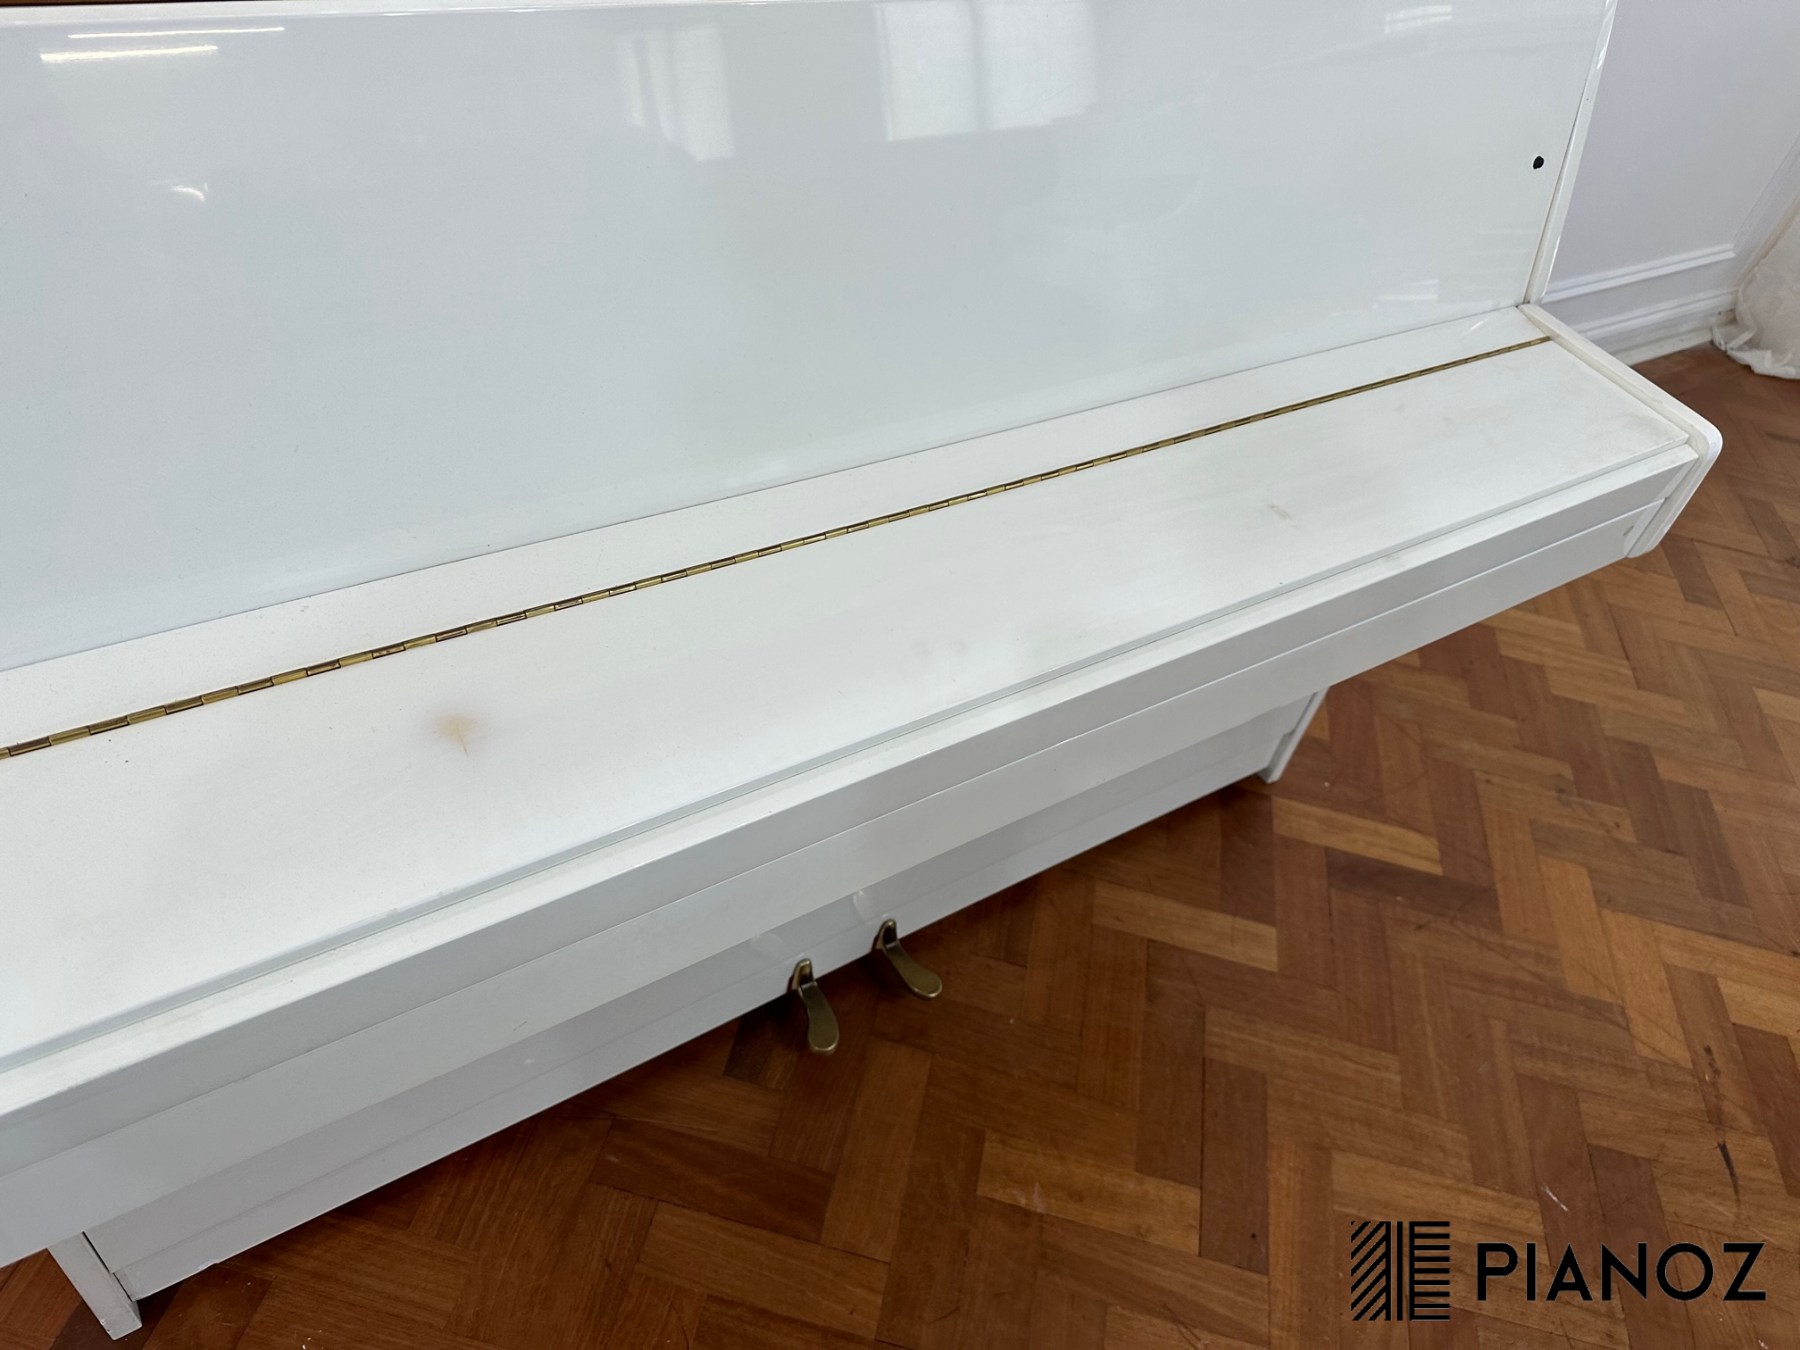 Kawai Japanese White Upright Piano piano for sale in UK